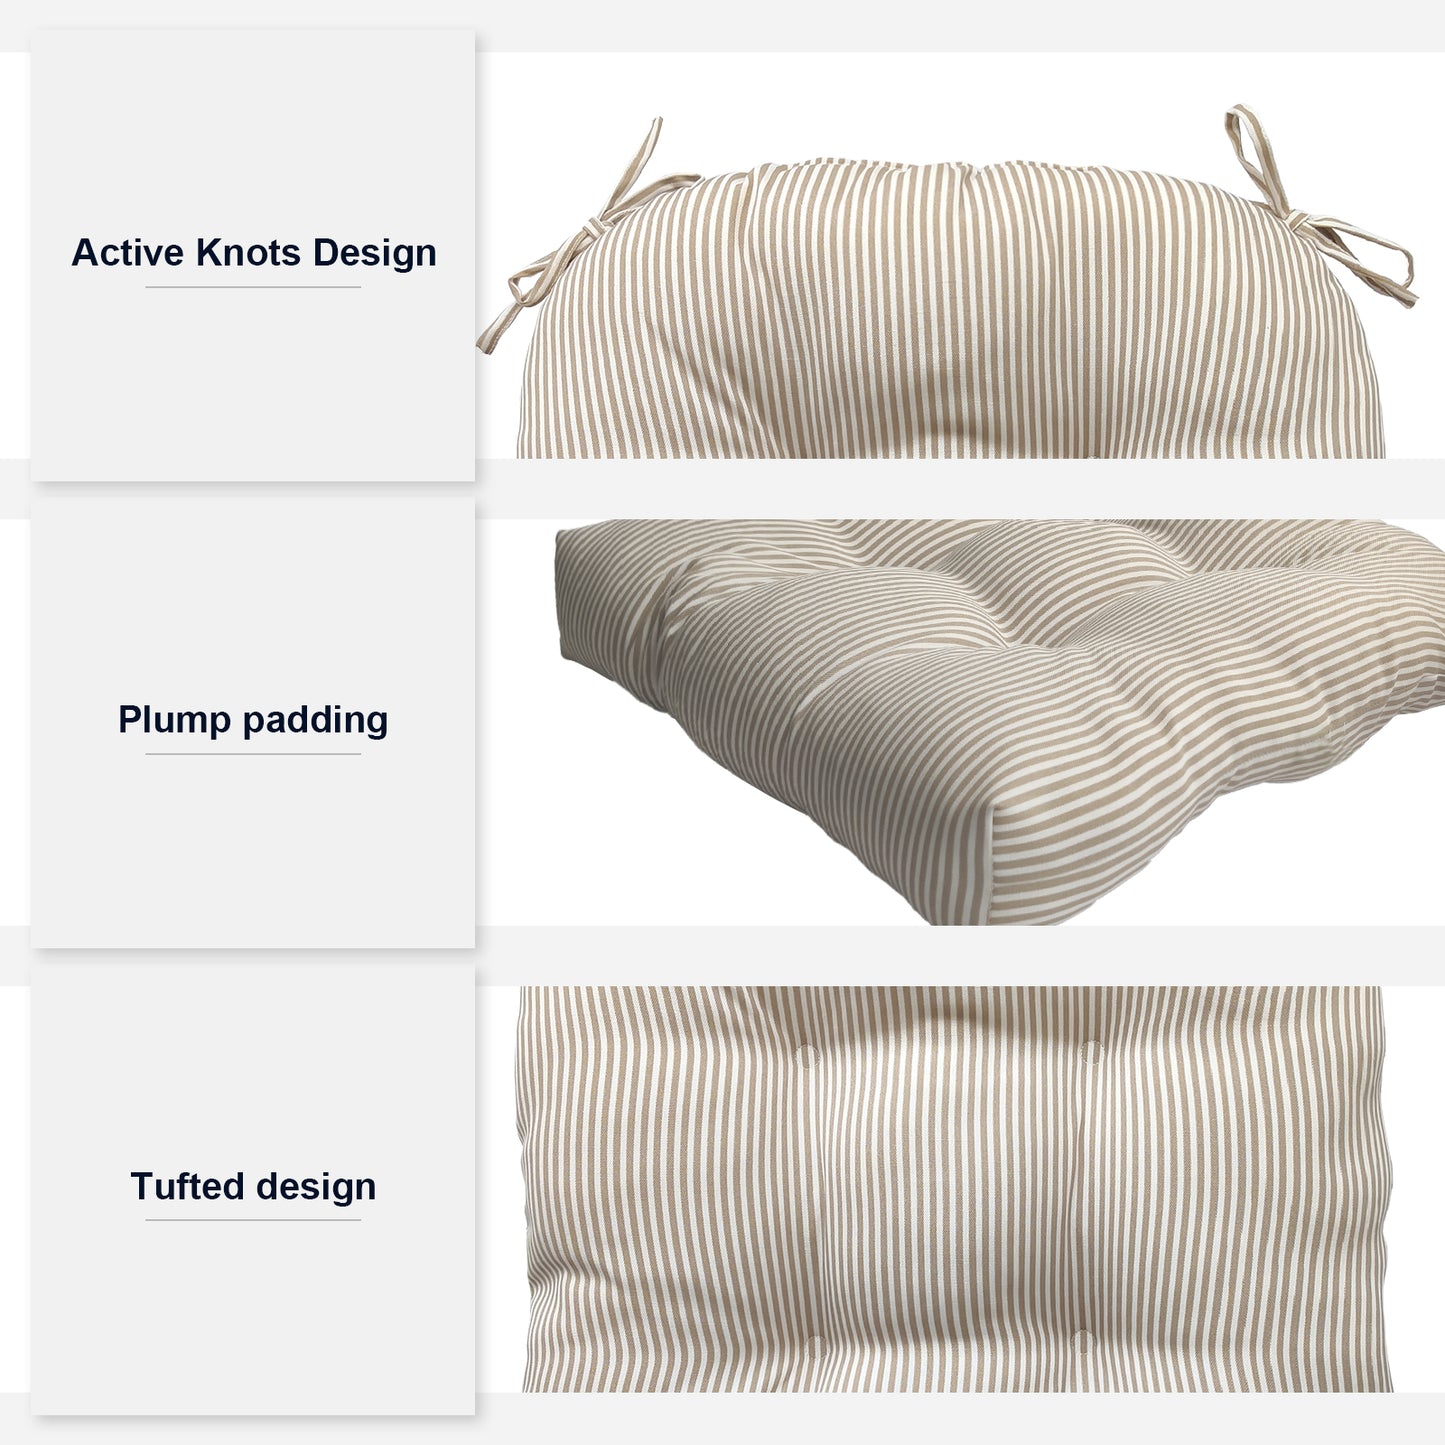 Melody Elephant Patio Wicker Chair Cushions, All Weather Outdoor Tufted Chair Pads Pack of 2, 19 x 19 x 5 Inch U-Shaped Seat Cushions of Garden Furniture Decoration, Stripe Beige